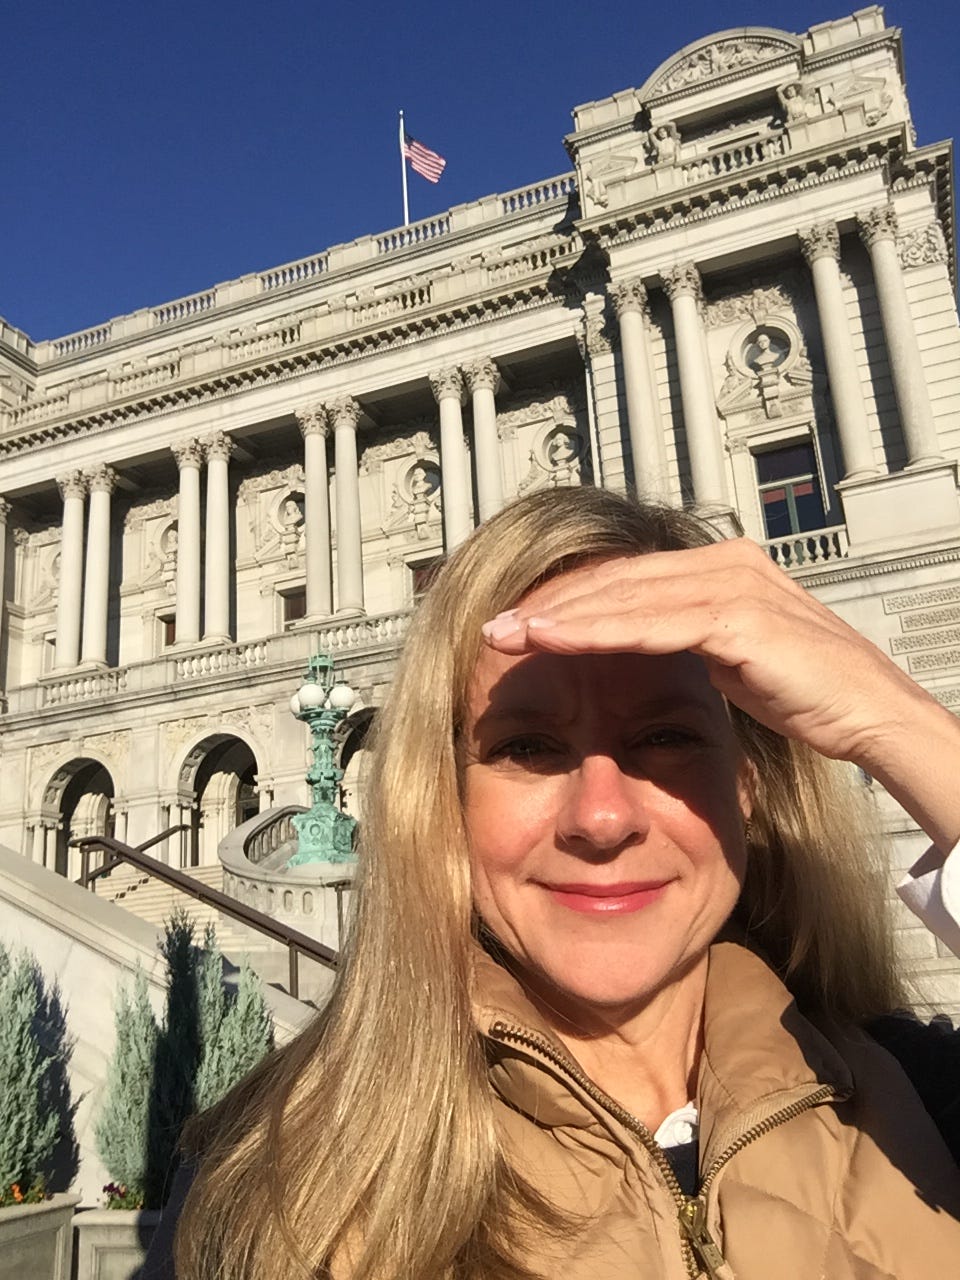 Woman shielding her eyes from the sun, standing in front of the Library of Congress with white marble pillars and an American flag in the backround